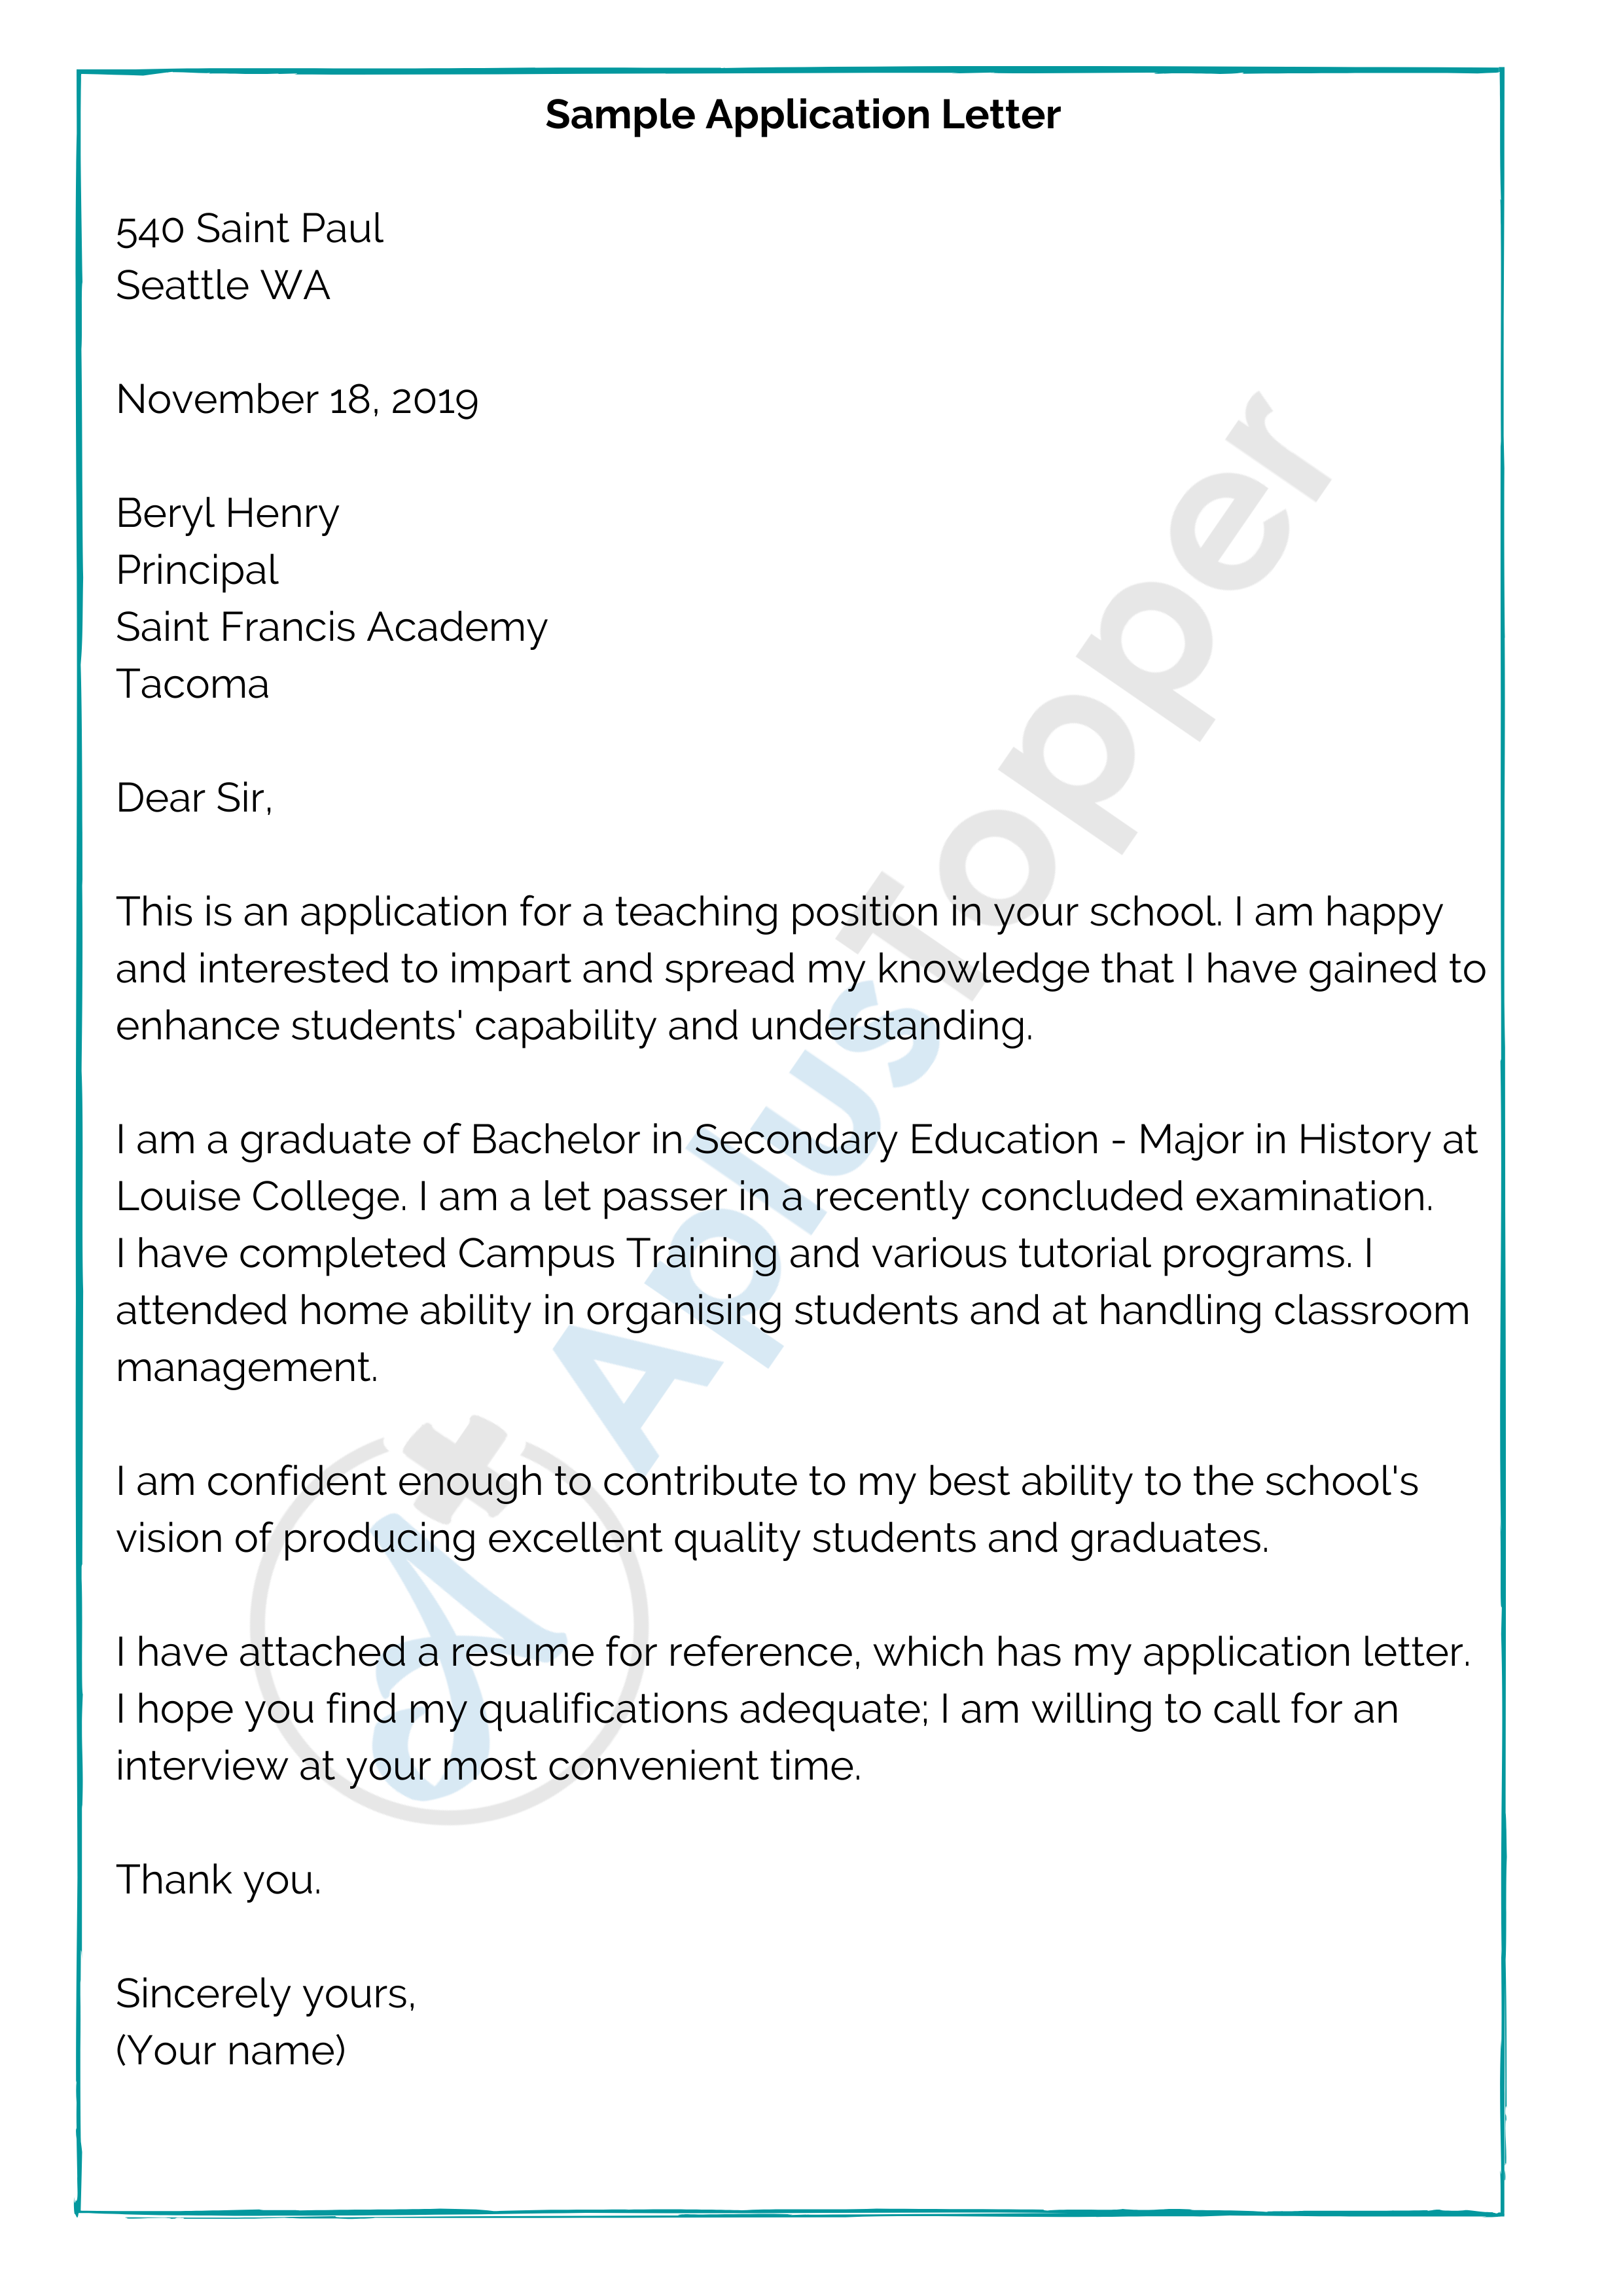 example of application letter sample